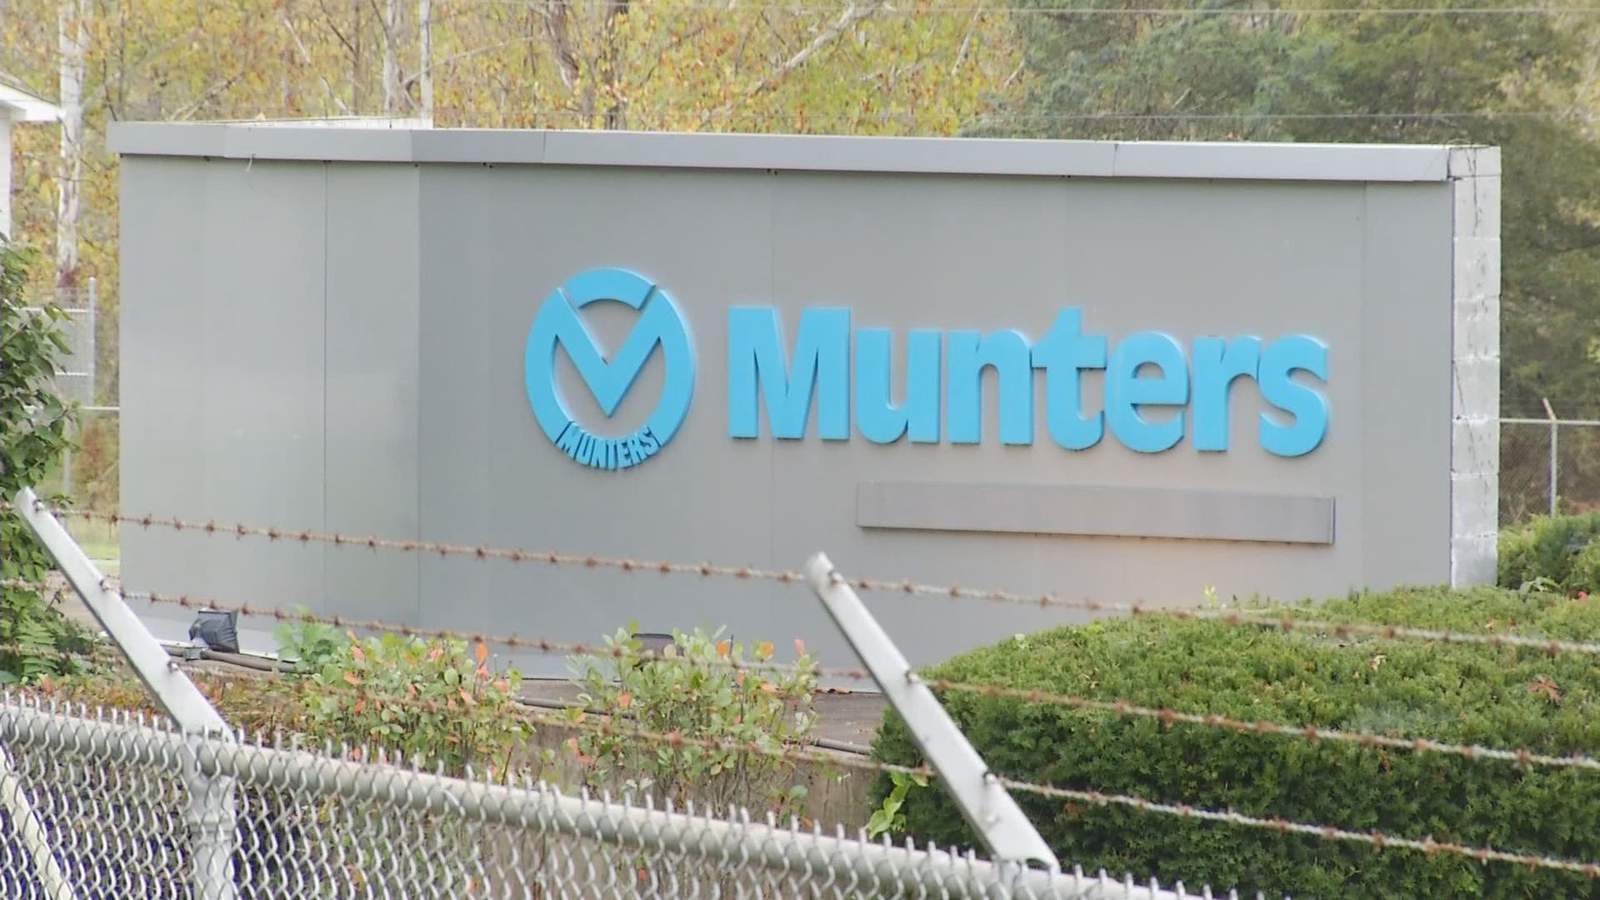 Munters announces plans to move from Buena Vista to Botetourt County